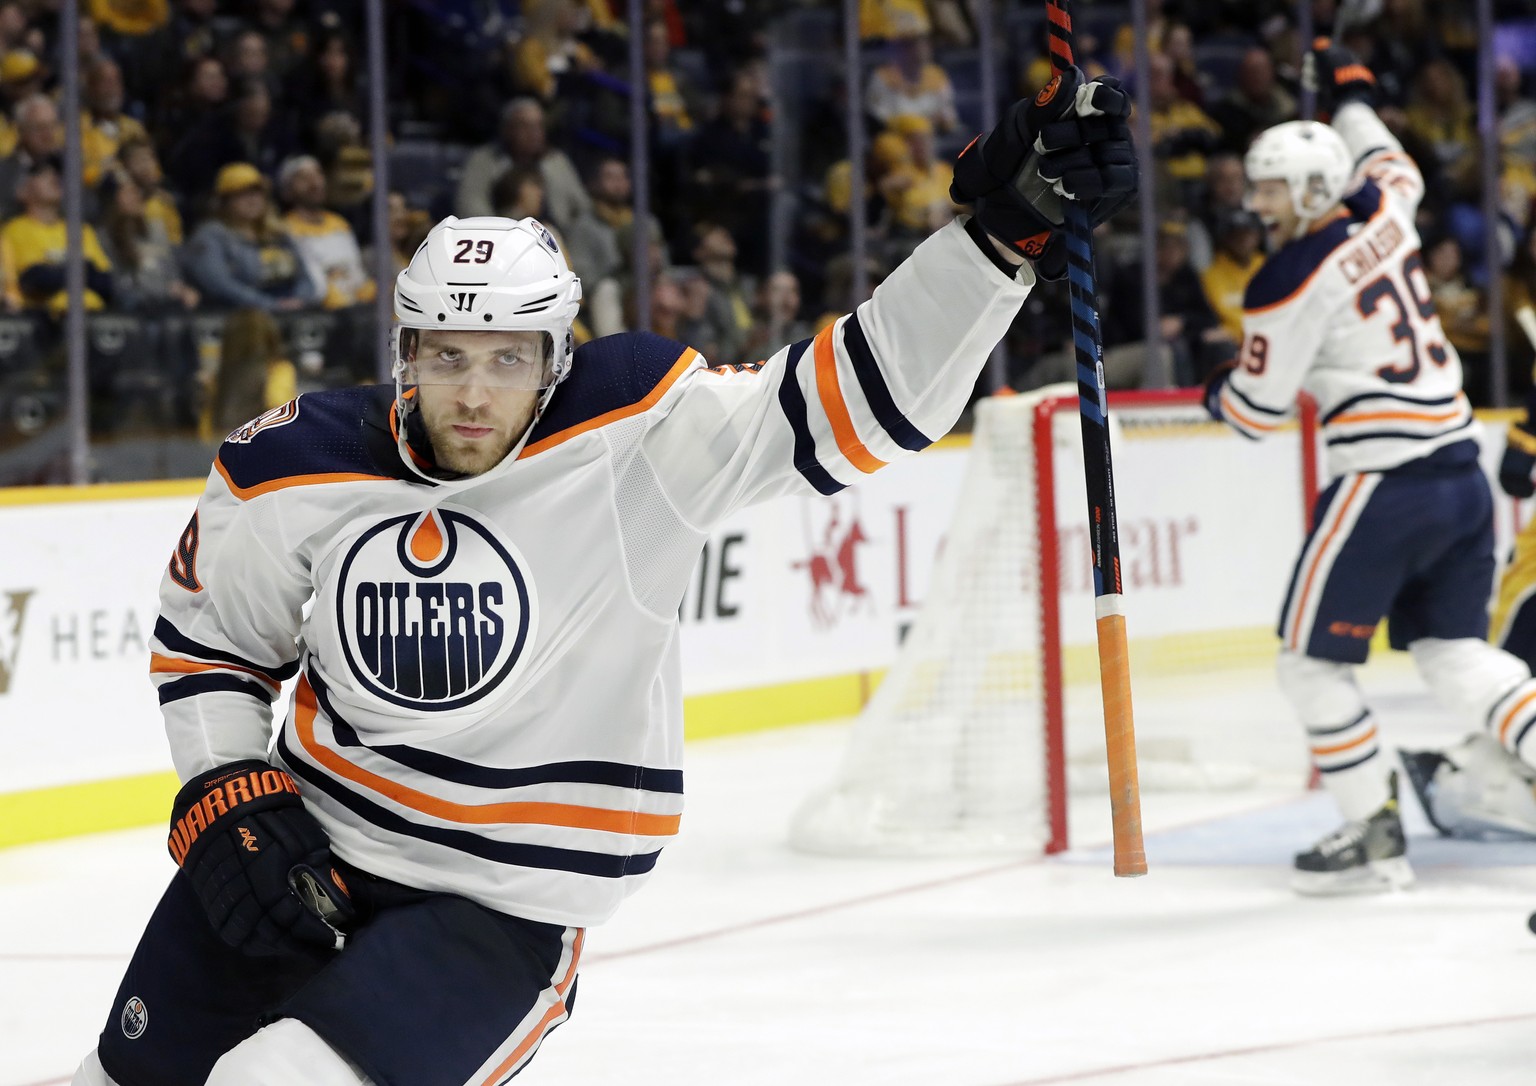 Edmonton Oilers center Leon Draisaitl (29), of Germany, celebrates after scoring a goal against the Nashville Predators in the third period of an NHL hockey game Saturday, Oct. 27, 2018, in Nashville, ...